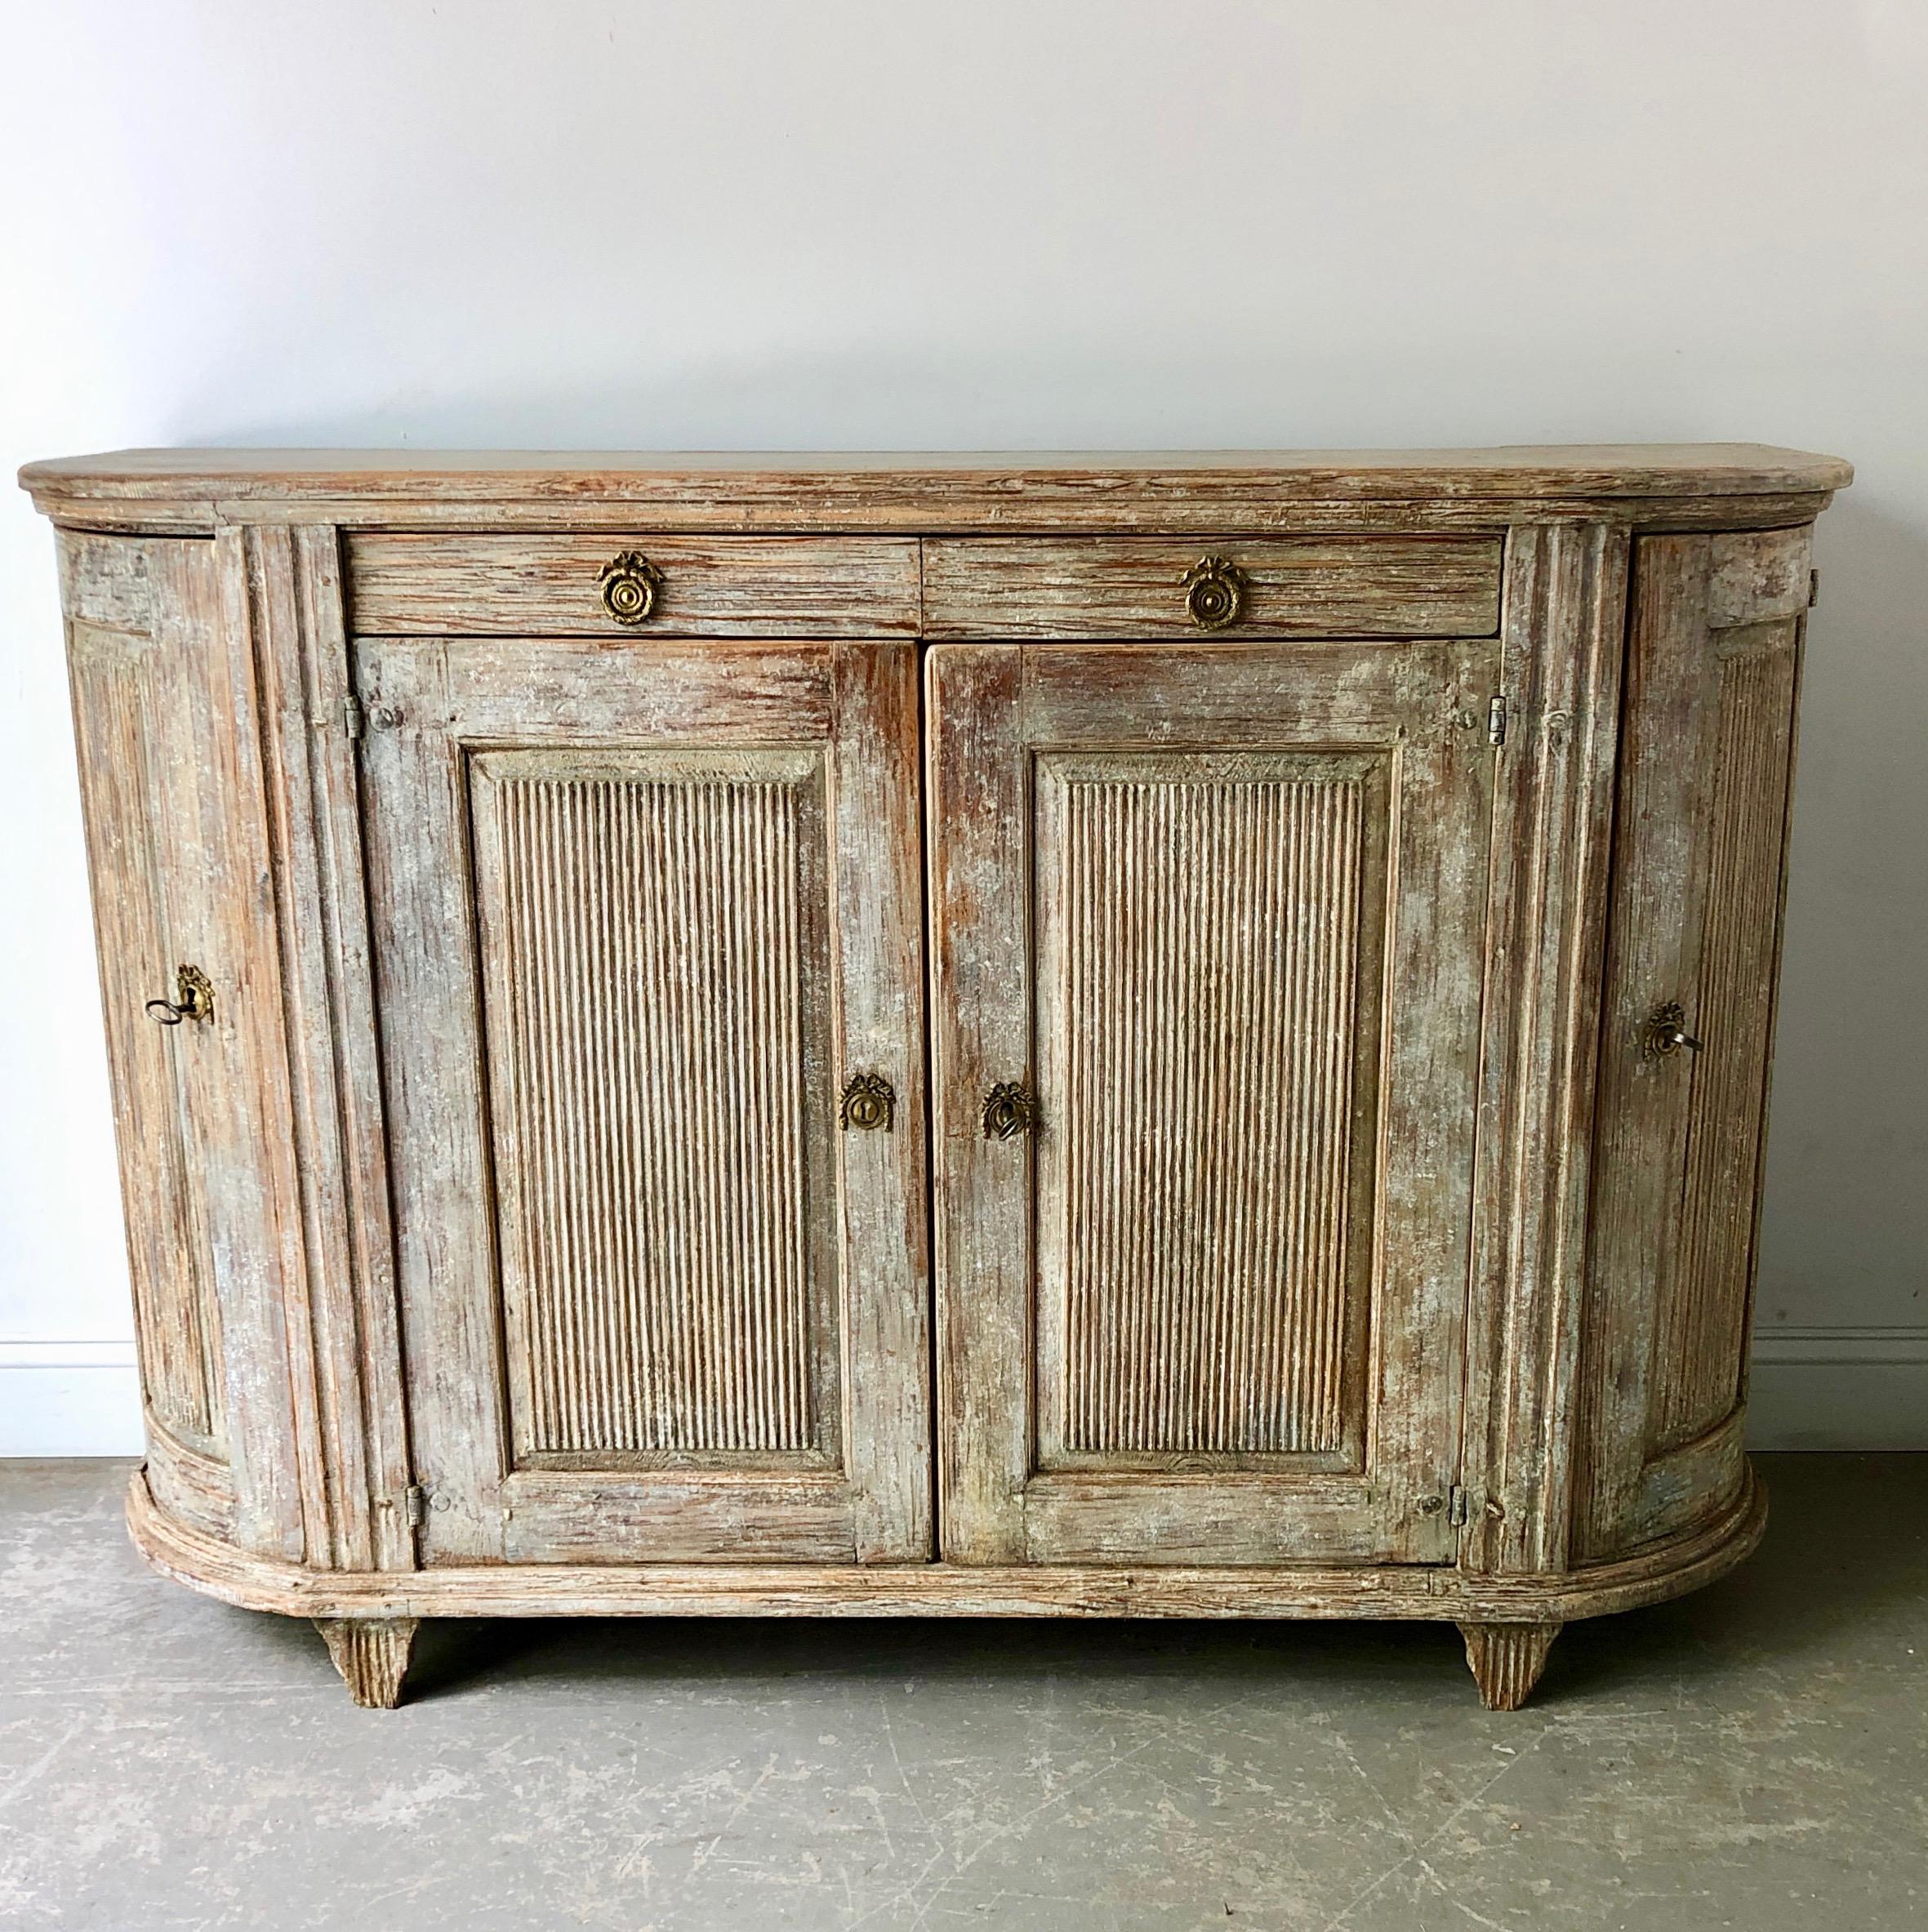 Very large, 18th century Swedish period Gustavian sideboard in classic Gustavian manor; rounded form with reeded corner posts, four paneled reeded doors and two drawers for storage, all resting on short reeded tapered feet. Wonderful find with a lot